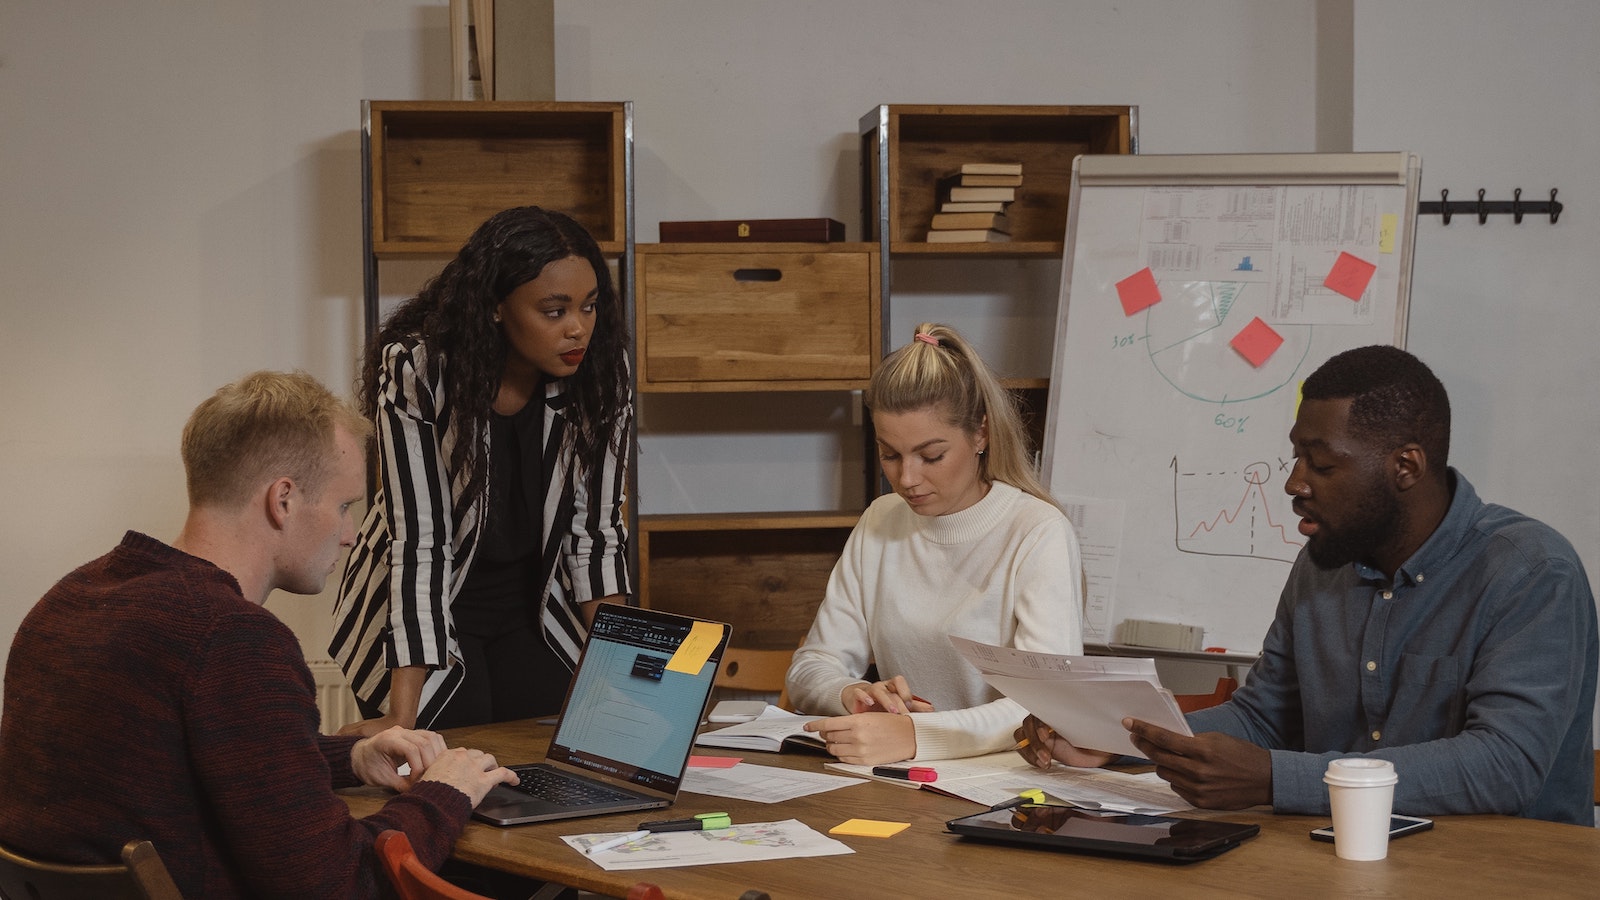 Four people strategize in an office setting